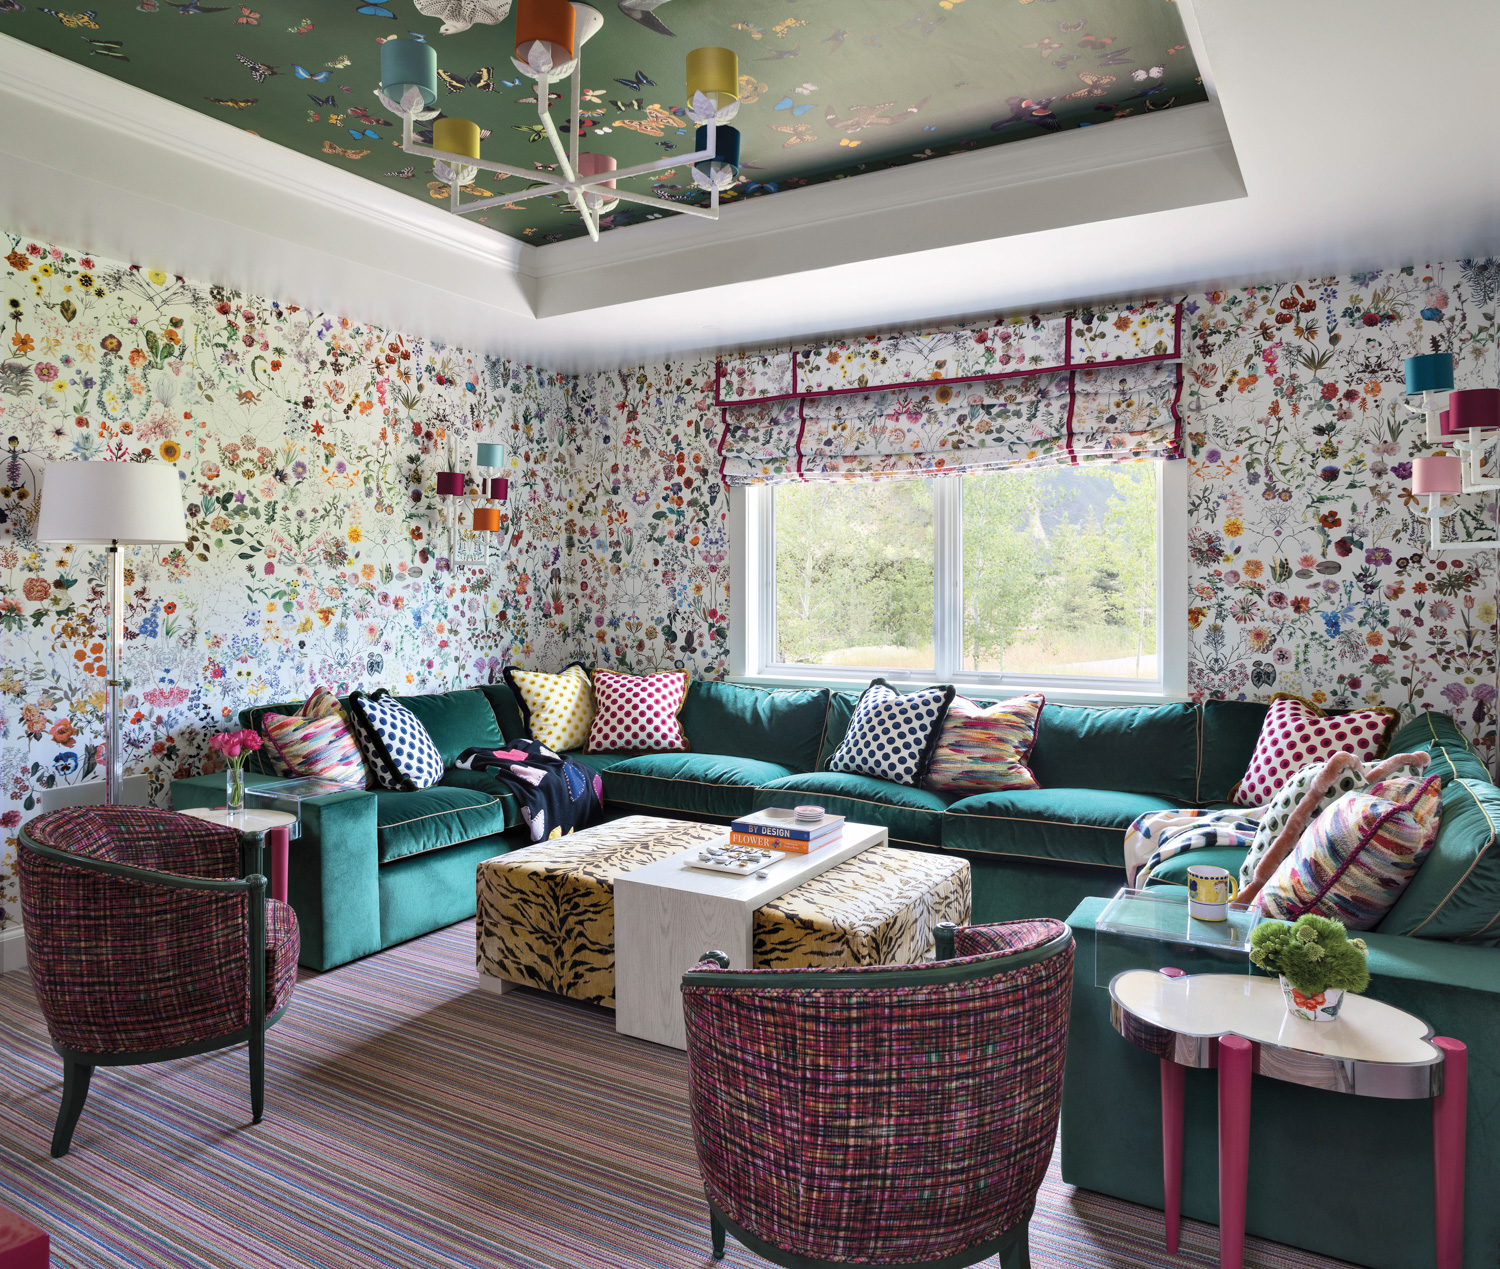 Room with floral wallpaper, teal sectional, green painted ceiling, tiger-print table and striped rug